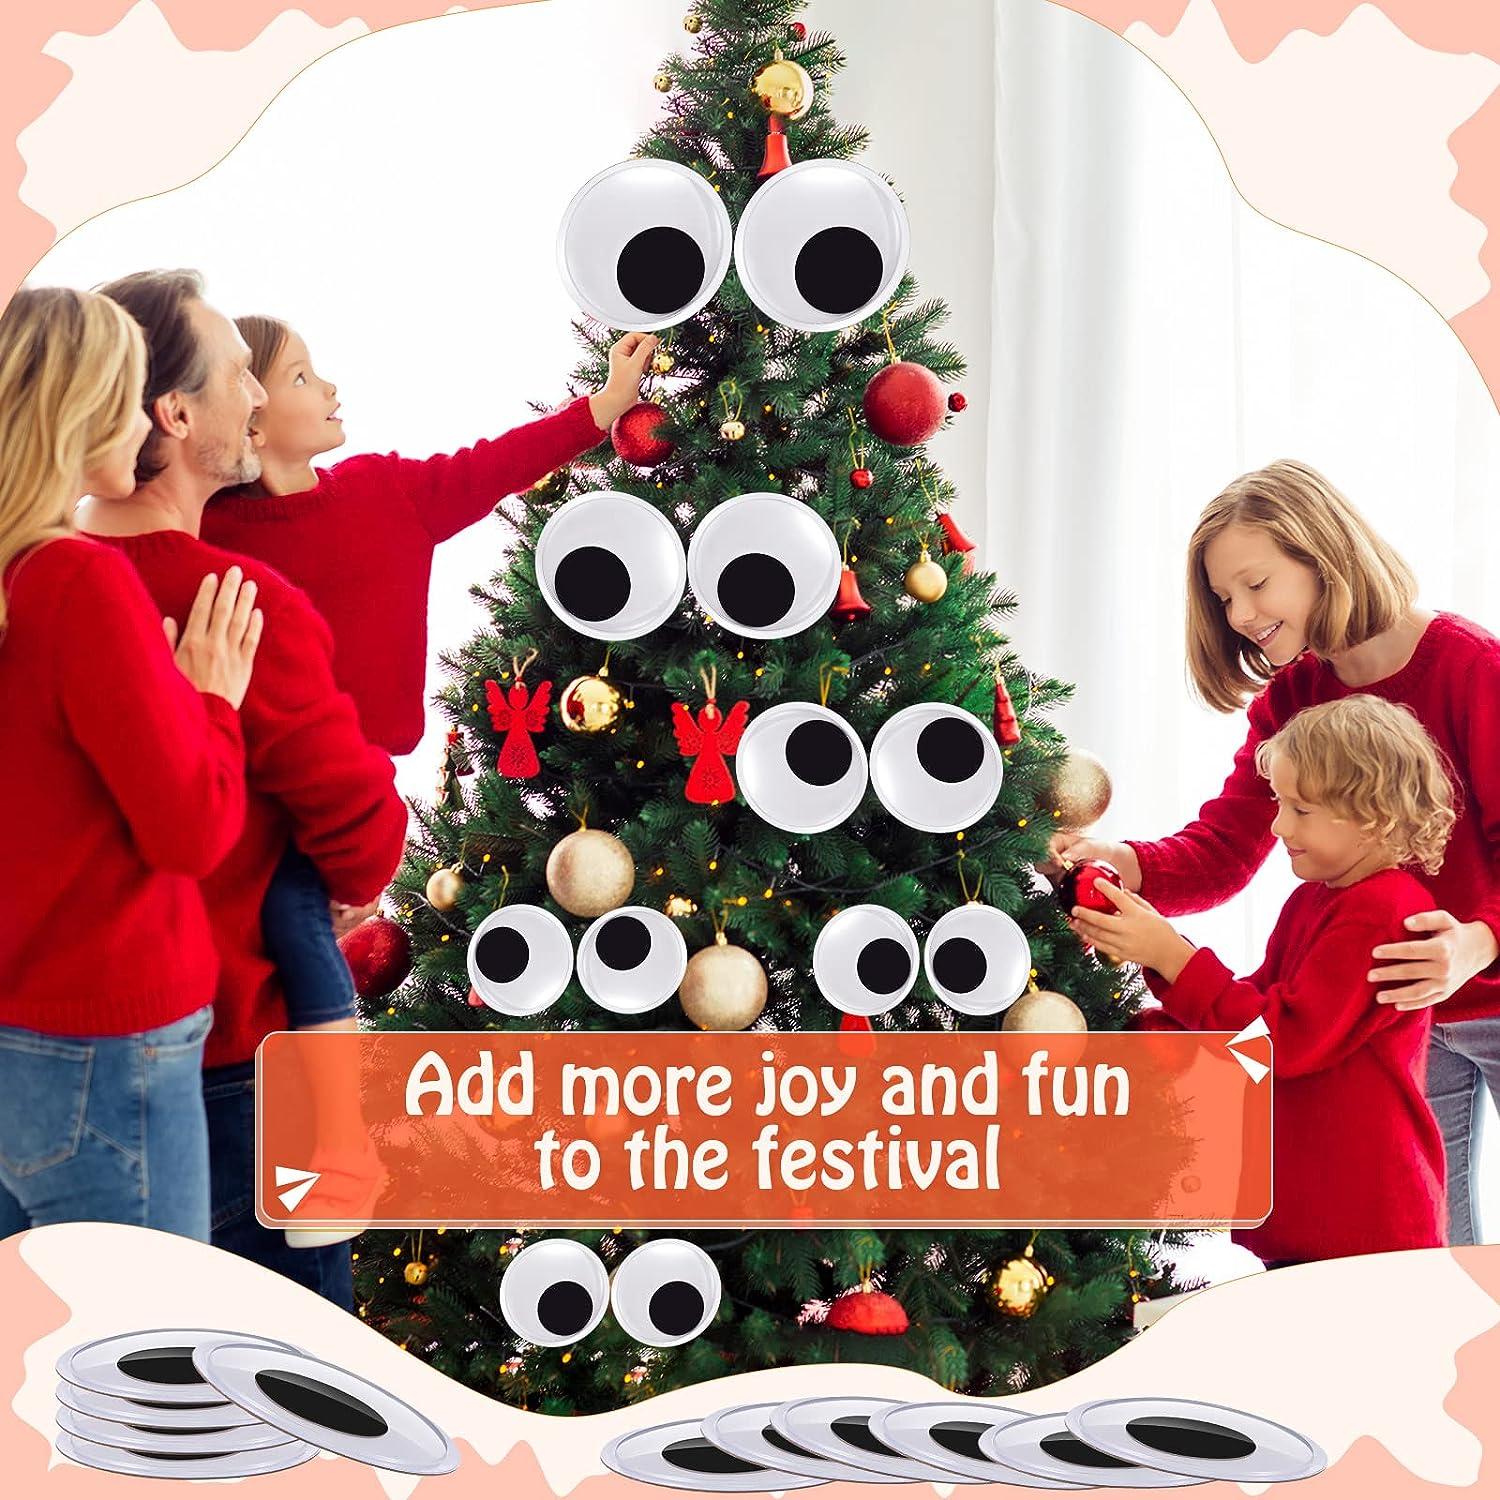  16 Pieces 6 Inch Giant Googly Eyes Halloween Plastic Wiggle  Eyes Large Sized Wiggle Eyes with Self Adhesive for DIY Art Crafts  Christmas Tree Party Decorations